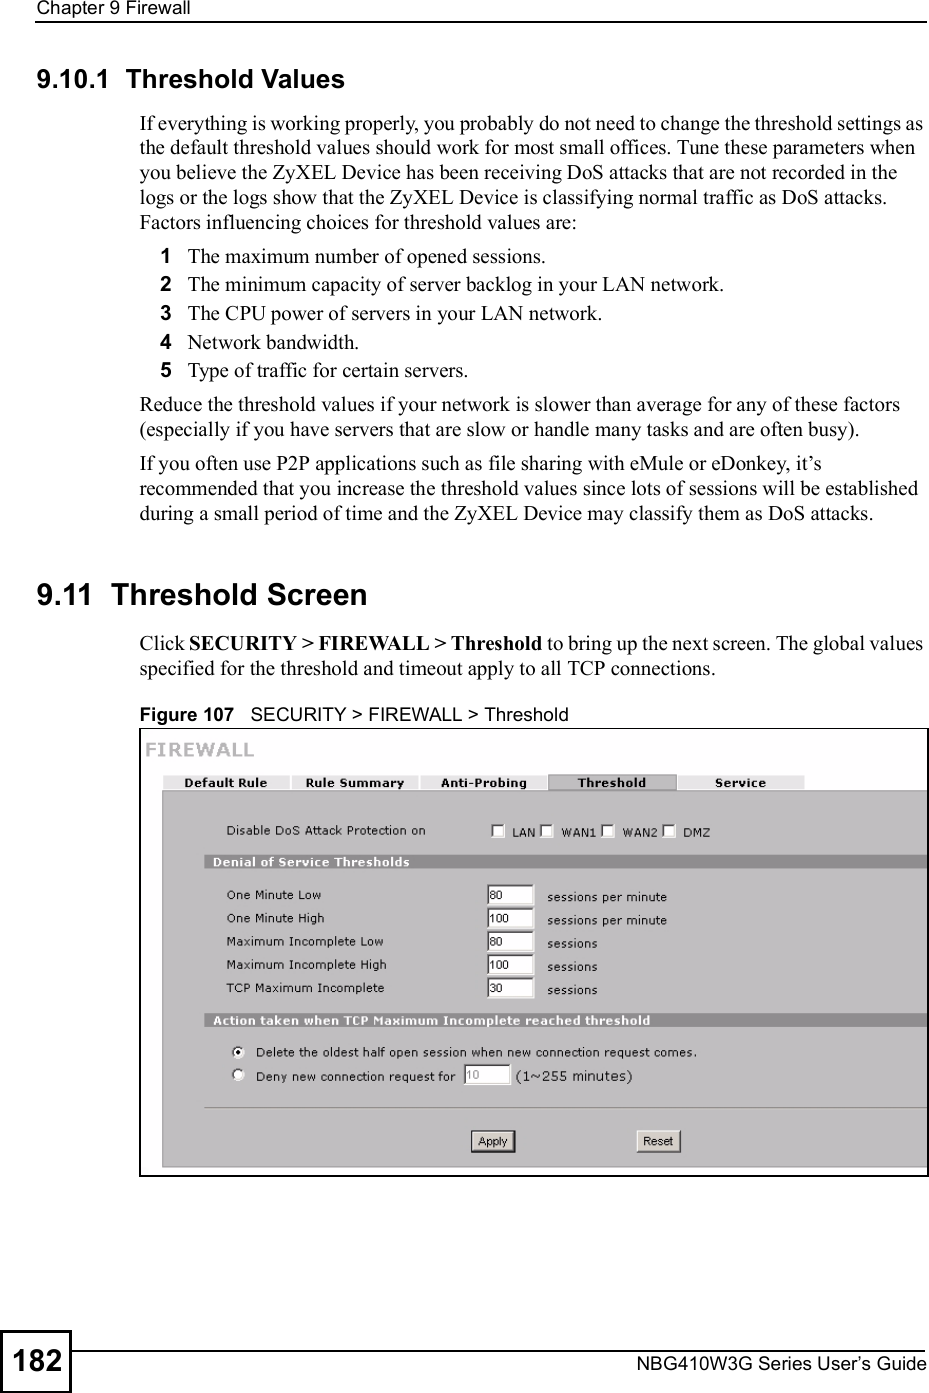 Chapter 9FirewallNBG410W3G Series User s Guide1829.10.1  Threshold ValuesIf everything is working properly, you probably do not need to change the threshold settings as the default threshold values should work for most small offices. Tune these parameters when you believe the ZyXEL Device has been receiving DoS attacks that are not recorded in the logs or the logs show that the ZyXEL Device is classifying normal traffic as DoS attacks. Factors influencing choices for threshold values are:1The maximum number of opened sessions.2The minimum capacity of server backlog in your LAN network.3The CPU power of servers in your LAN network.4Network bandwidth. 5Type of traffic for certain servers.Reduce the threshold values if your network is slower than average for any of these factors (especially if you have servers that are slow or handle many tasks and are often busy). If you often use P2P applications such as file sharing with eMule or eDonkey, it!s recommended that you increase the threshold values since lots of sessions will be established during a small period of time and the ZyXEL Device may classify them as DoS attacks.9.11  Threshold ScreenClick SECURITY &gt; FIREWALL &gt; Threshold to bring up the next screen. The global values specified for the threshold and timeout apply to all TCP connections. Figure 107   SECURITY &gt; FIREWALL &gt; Threshold         